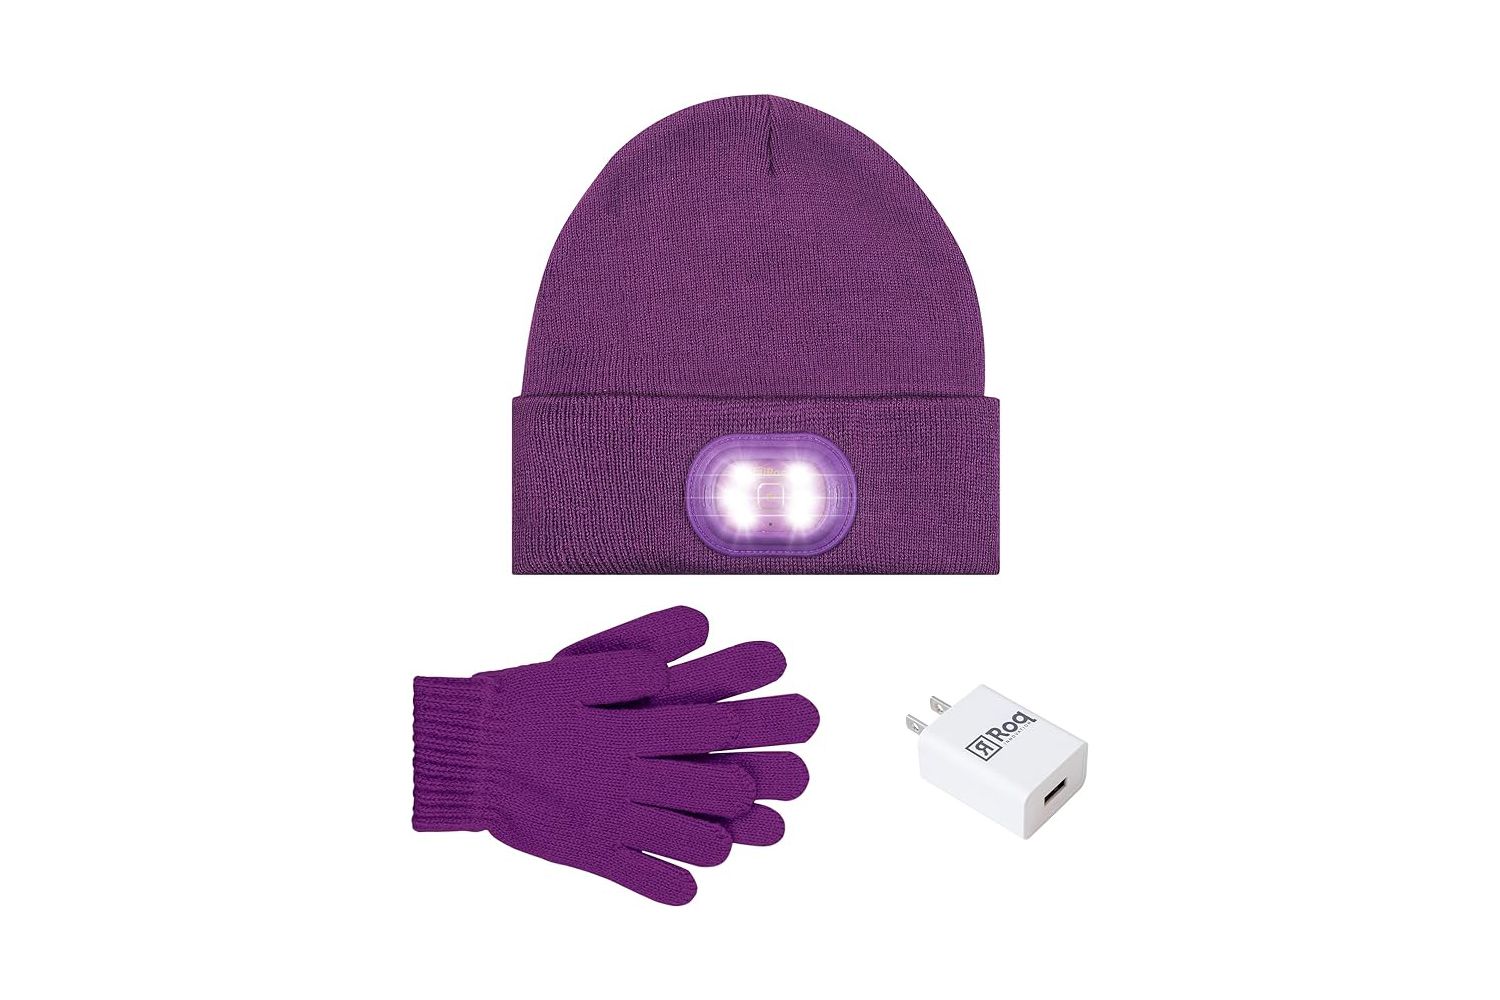 HEAD LIGHTZ Beanie and Glove Set with Charger